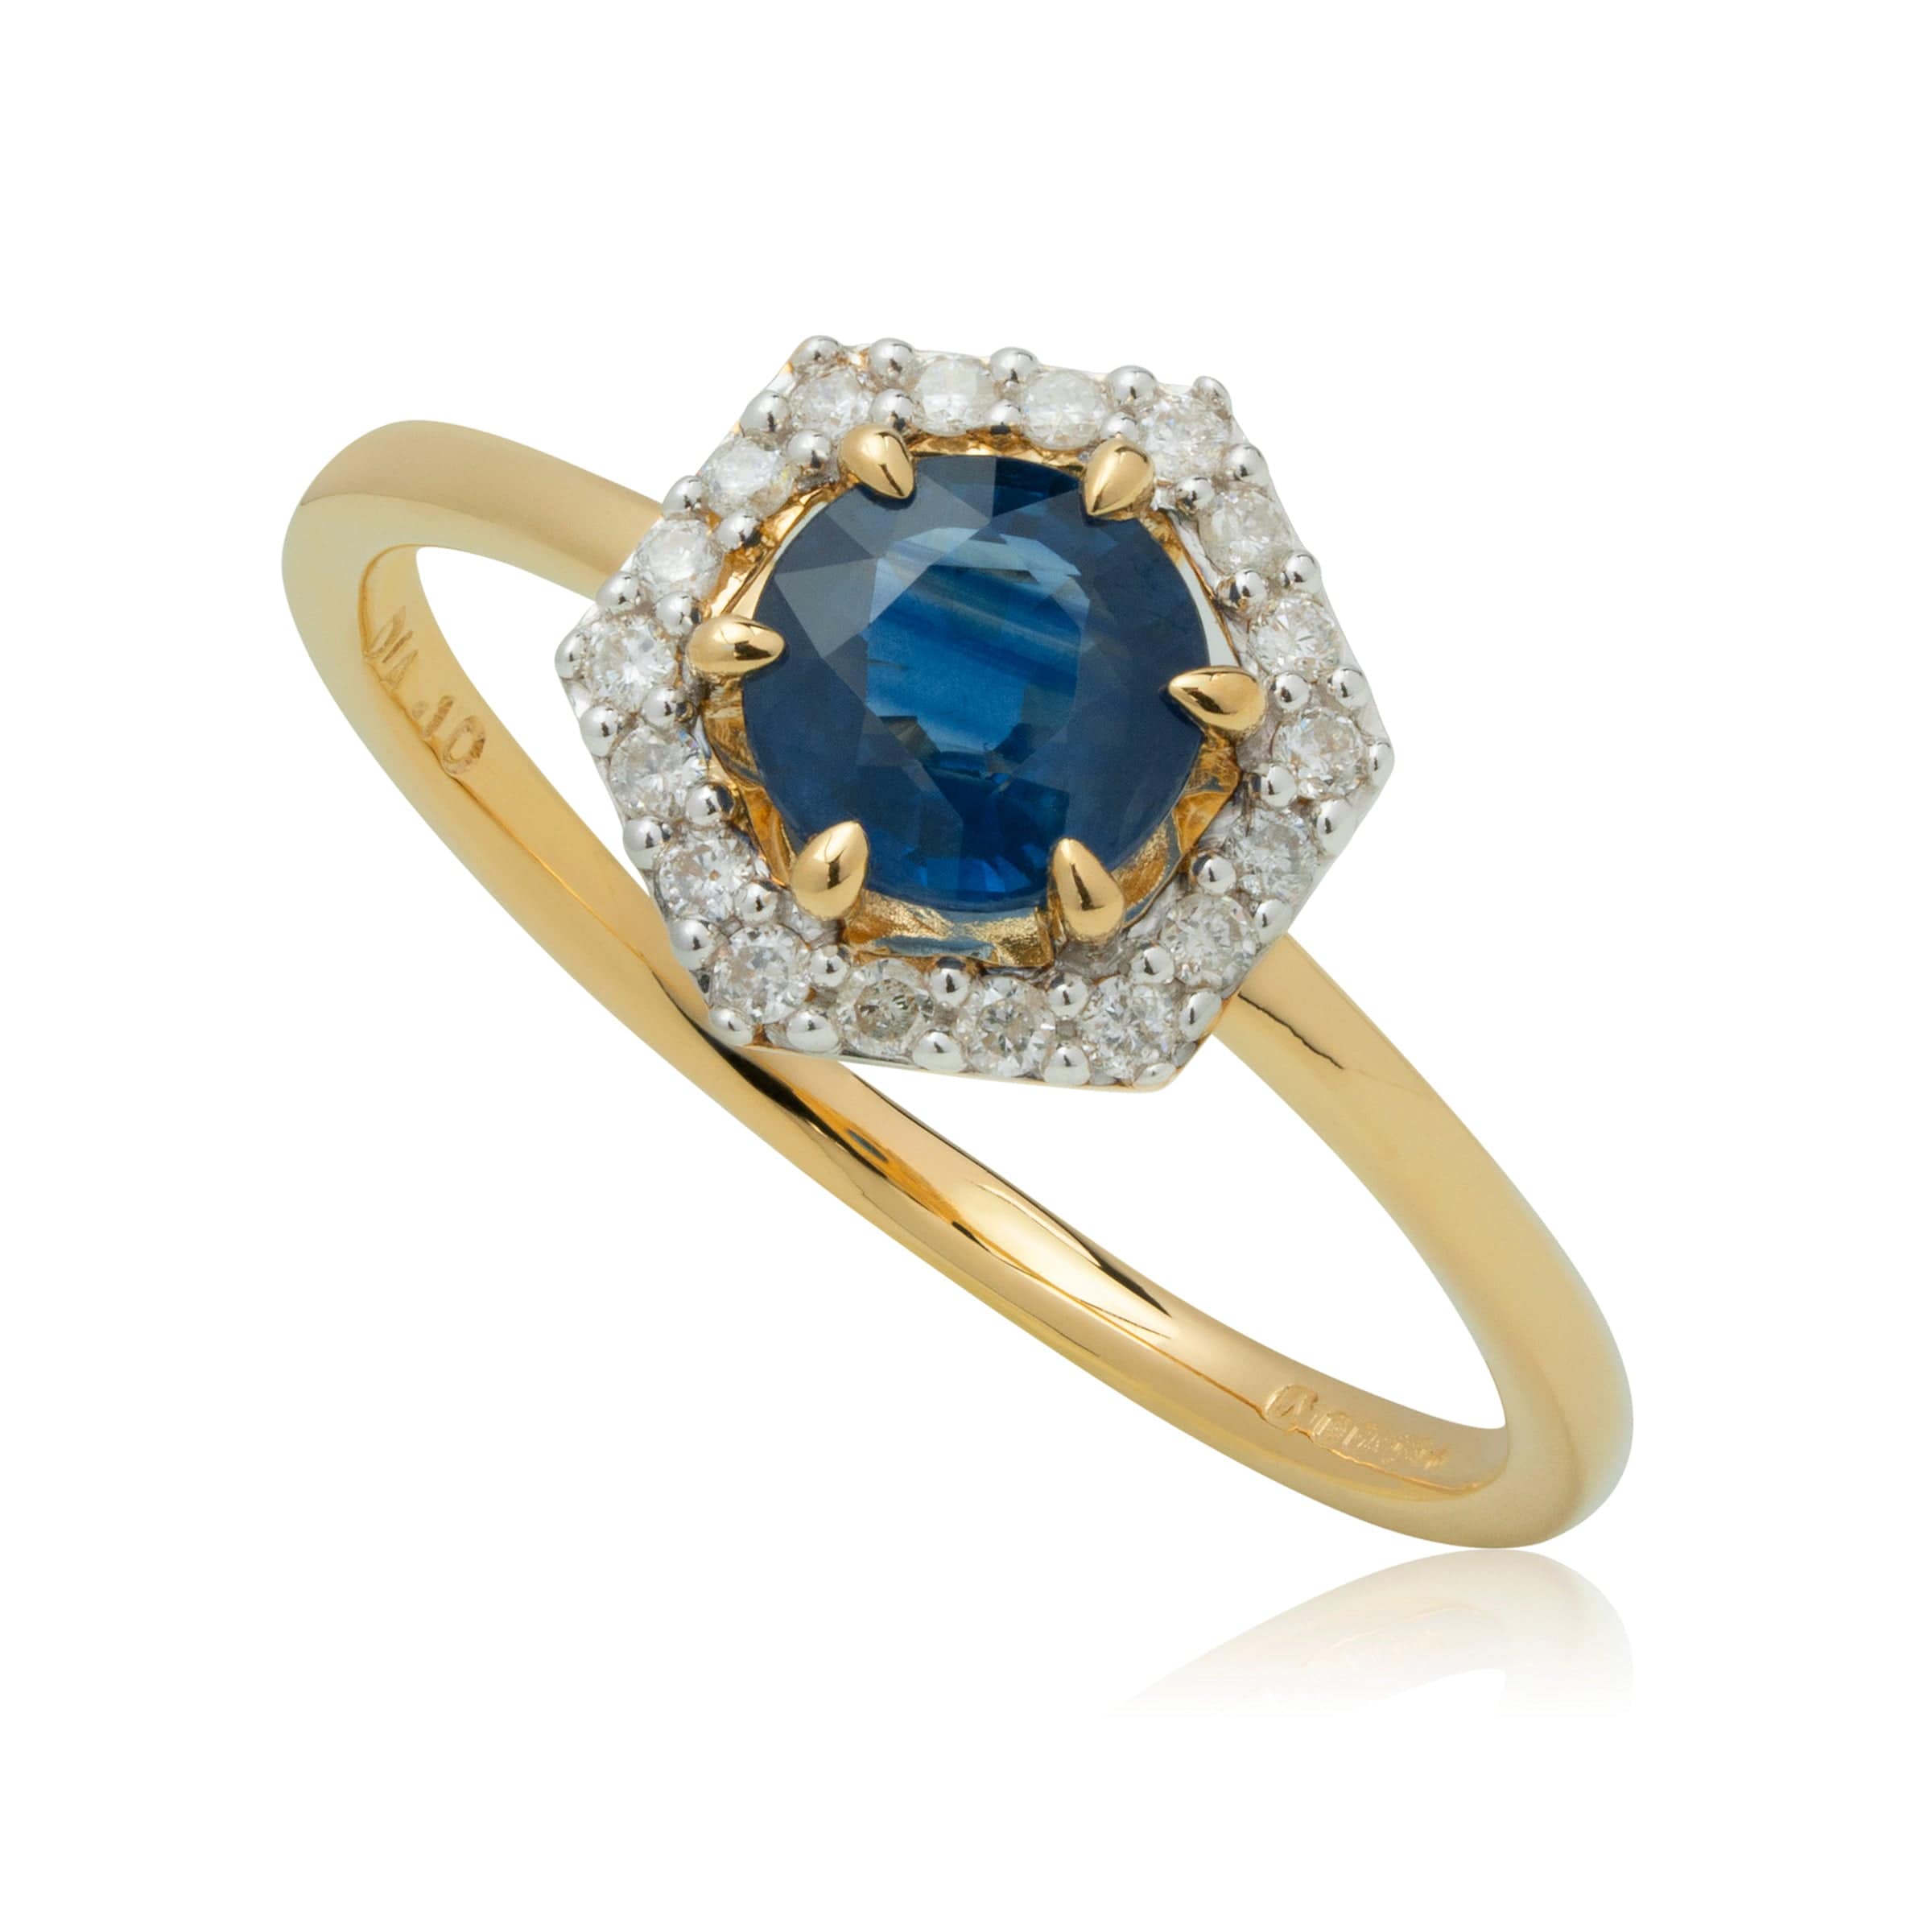 Sapphire & diamond halo engagement ring in 18ct yellow gold